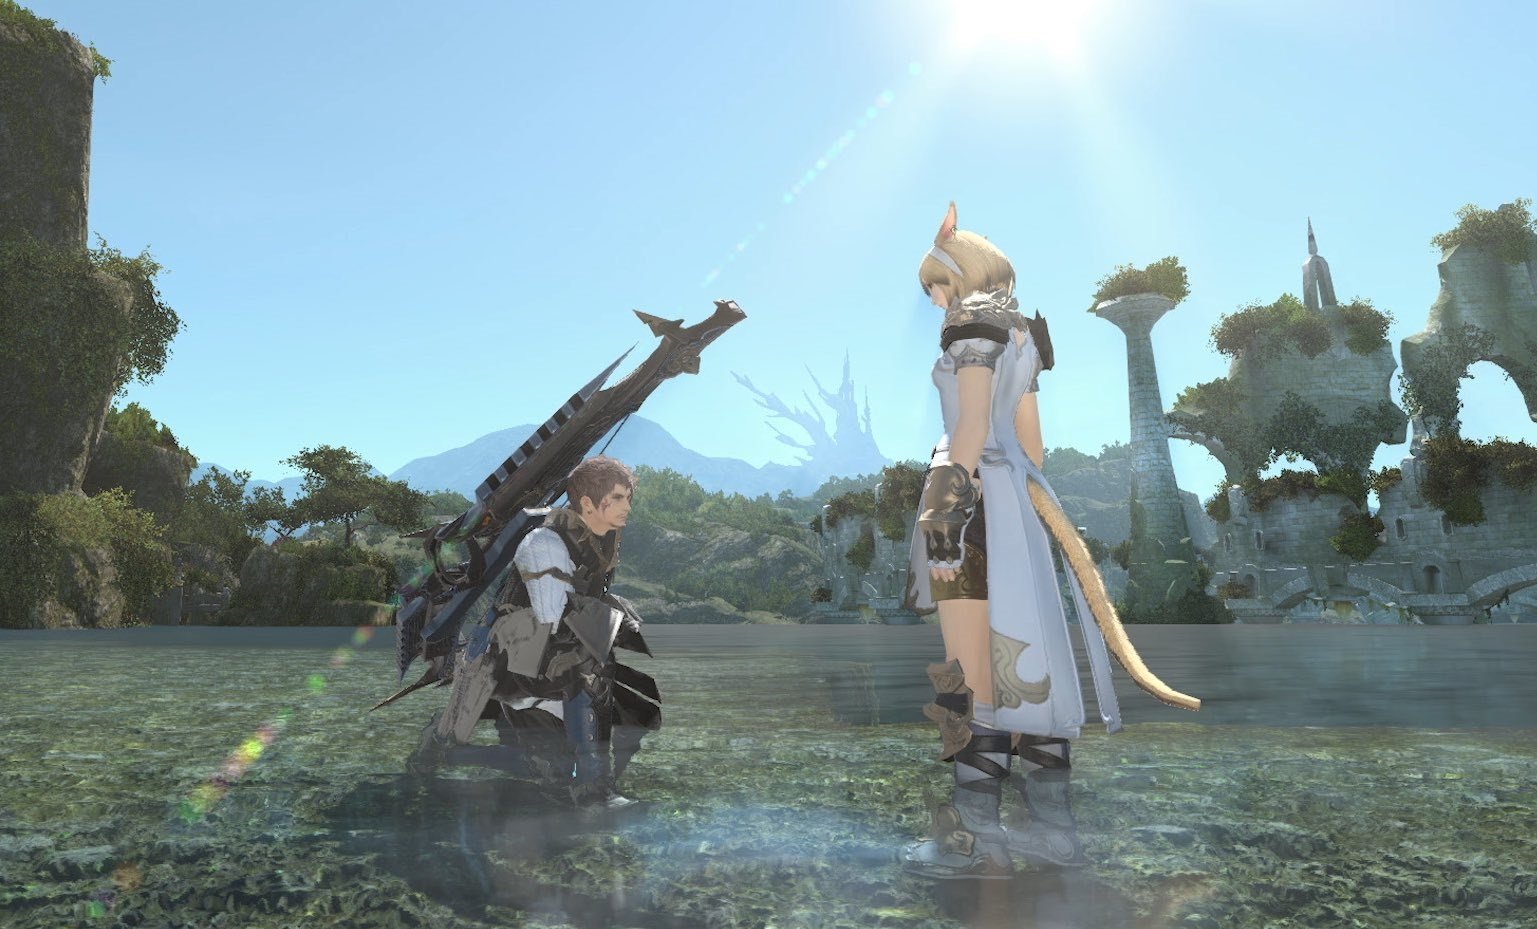 The Final Fantasy XIV 'Dad of Light' creator has passed away.